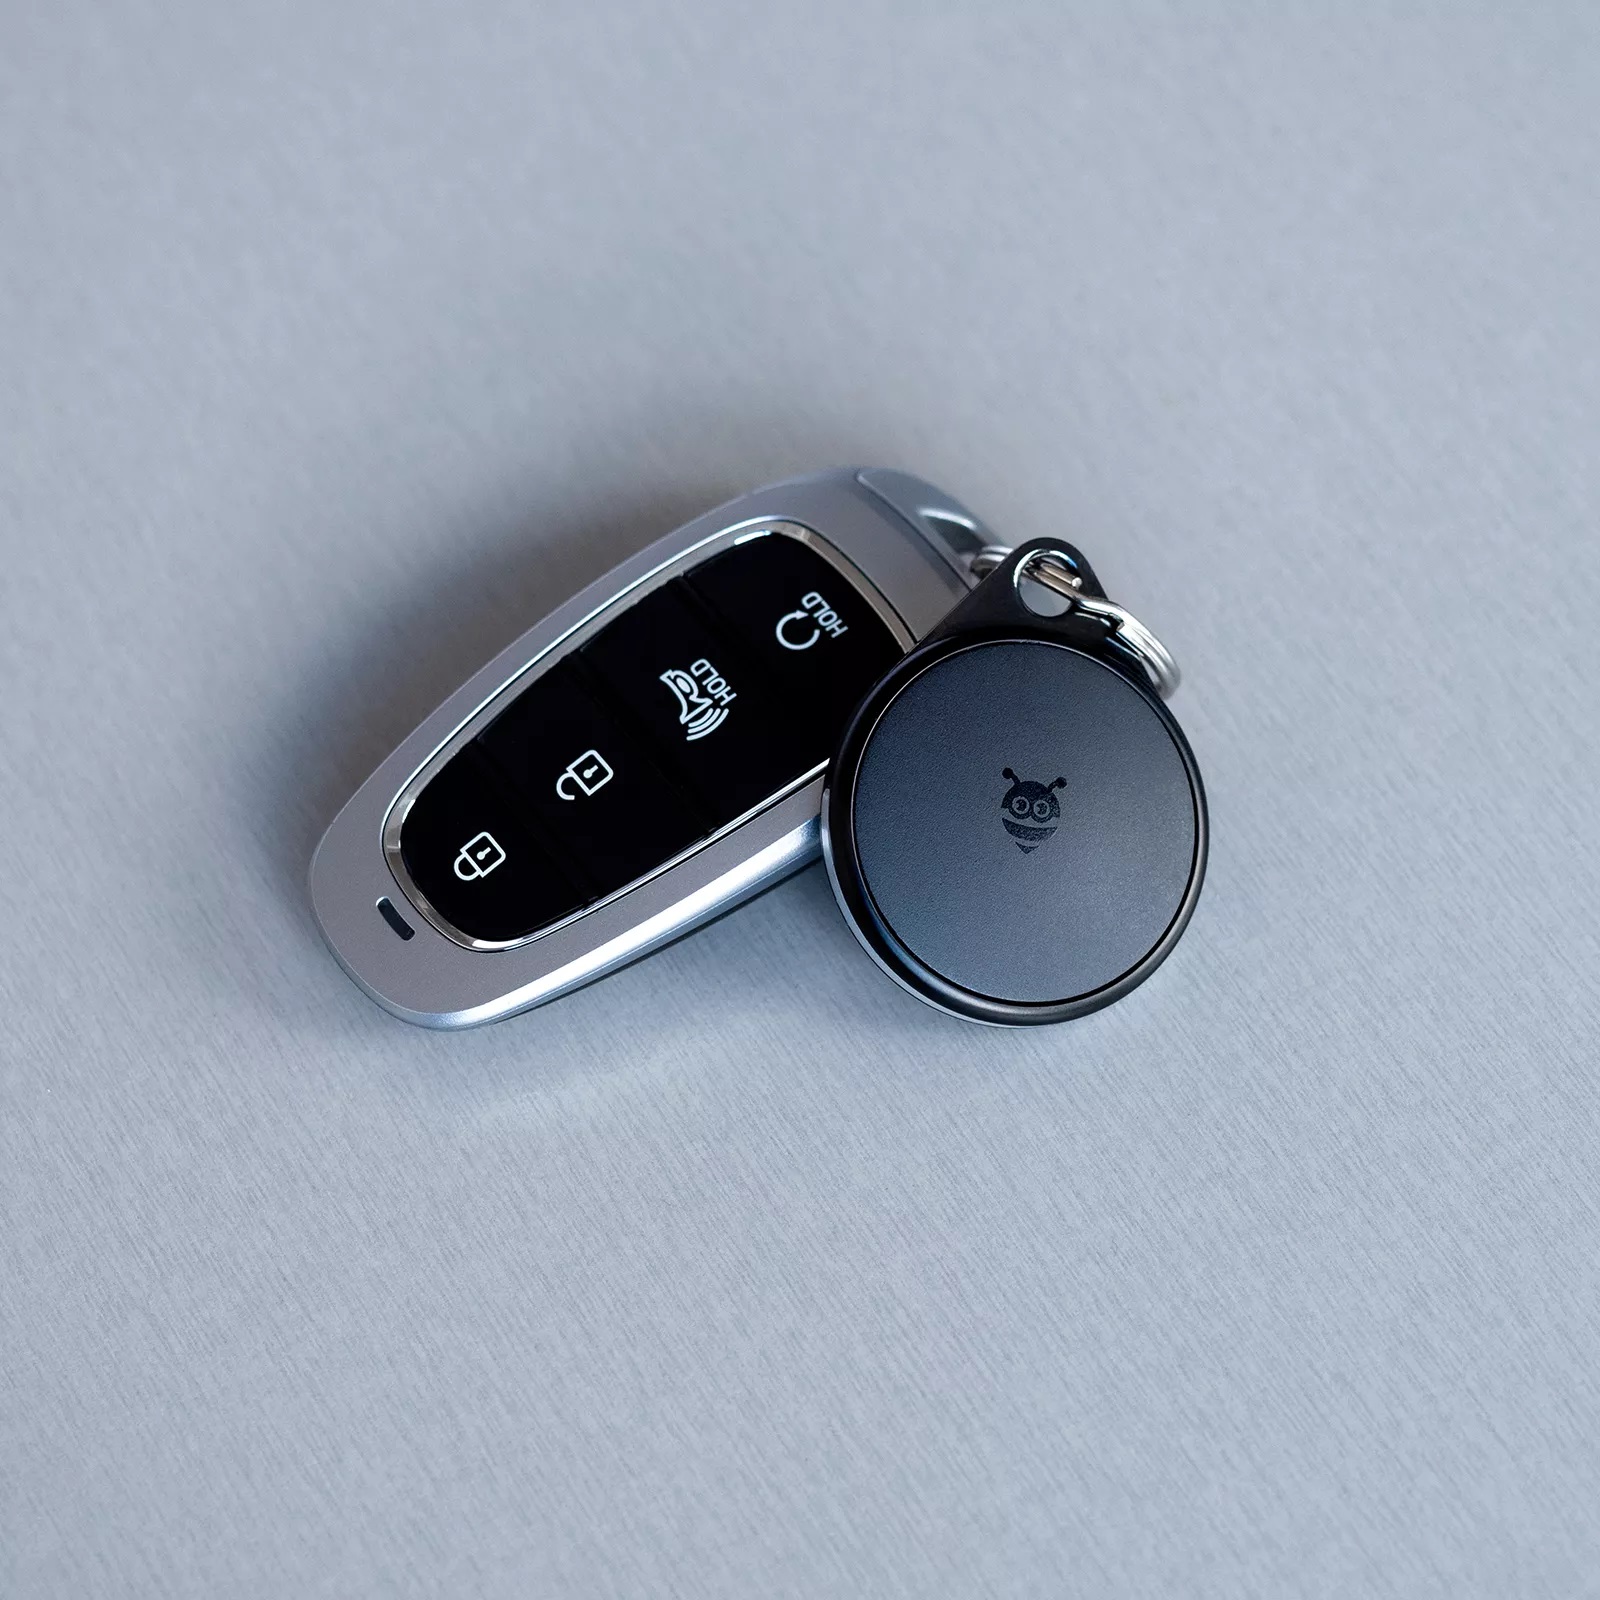 Picture of a pebble clip attached to the car keys